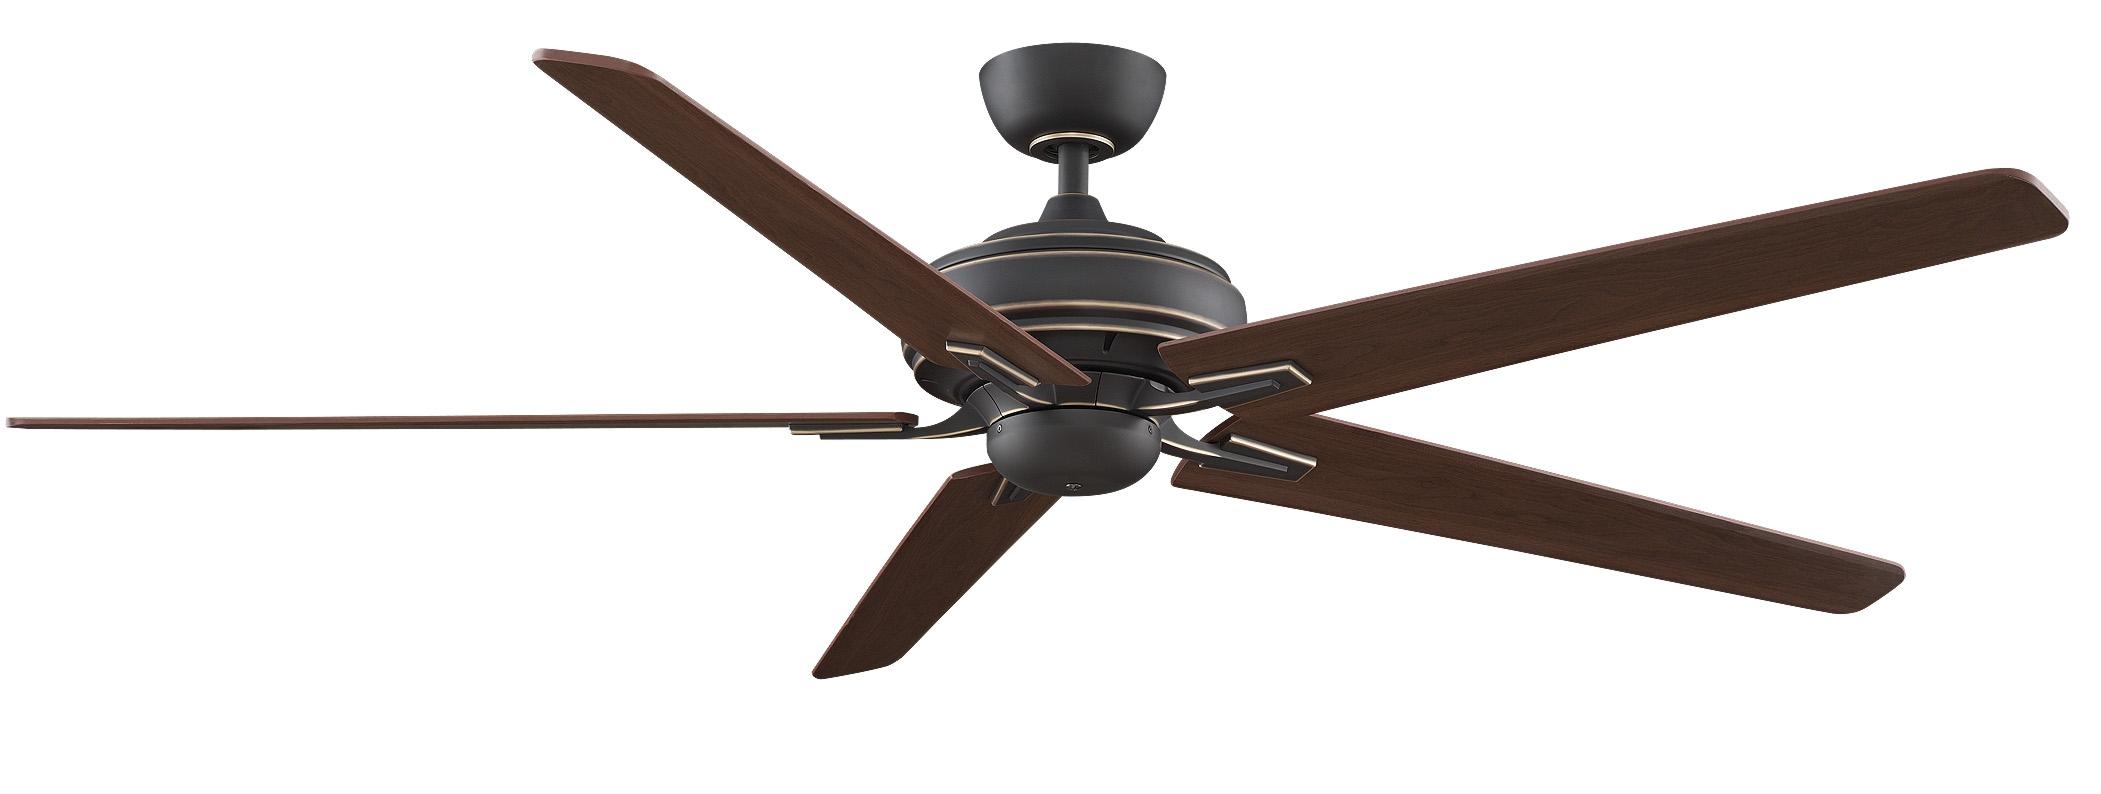 Large Ceiling Fans Without Lights